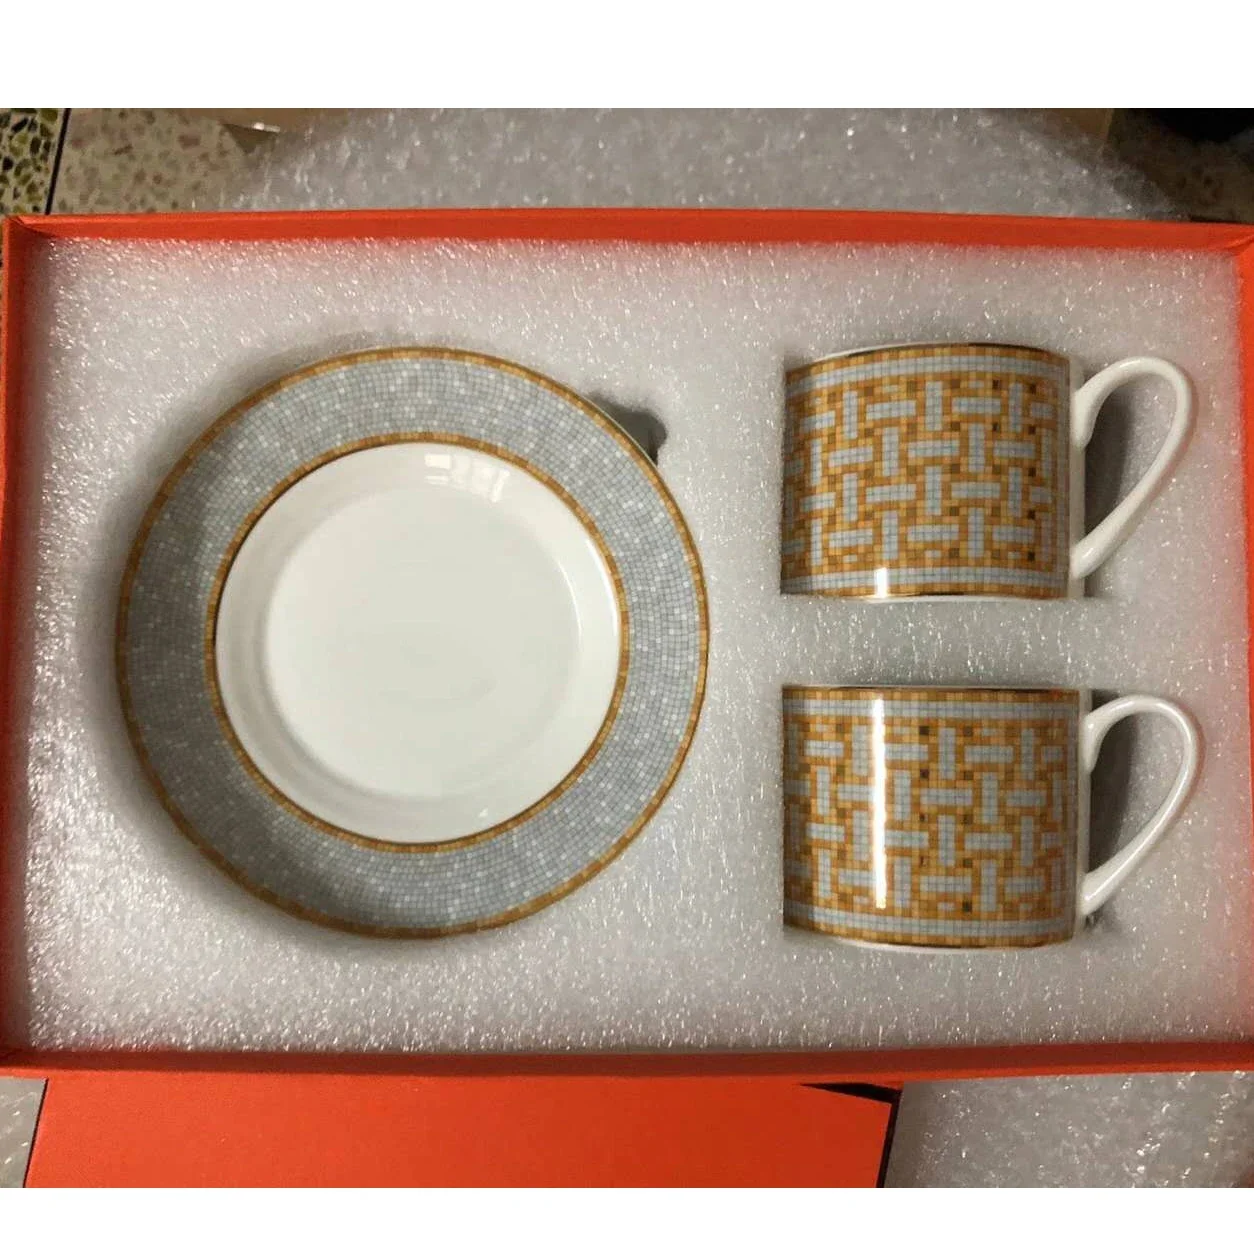 

2 PCS/ SET Elegant Top Grade Bone China Coffee Cup European Tea Cup Set and Saucer Afternoon Tea Coffee with Gift Box